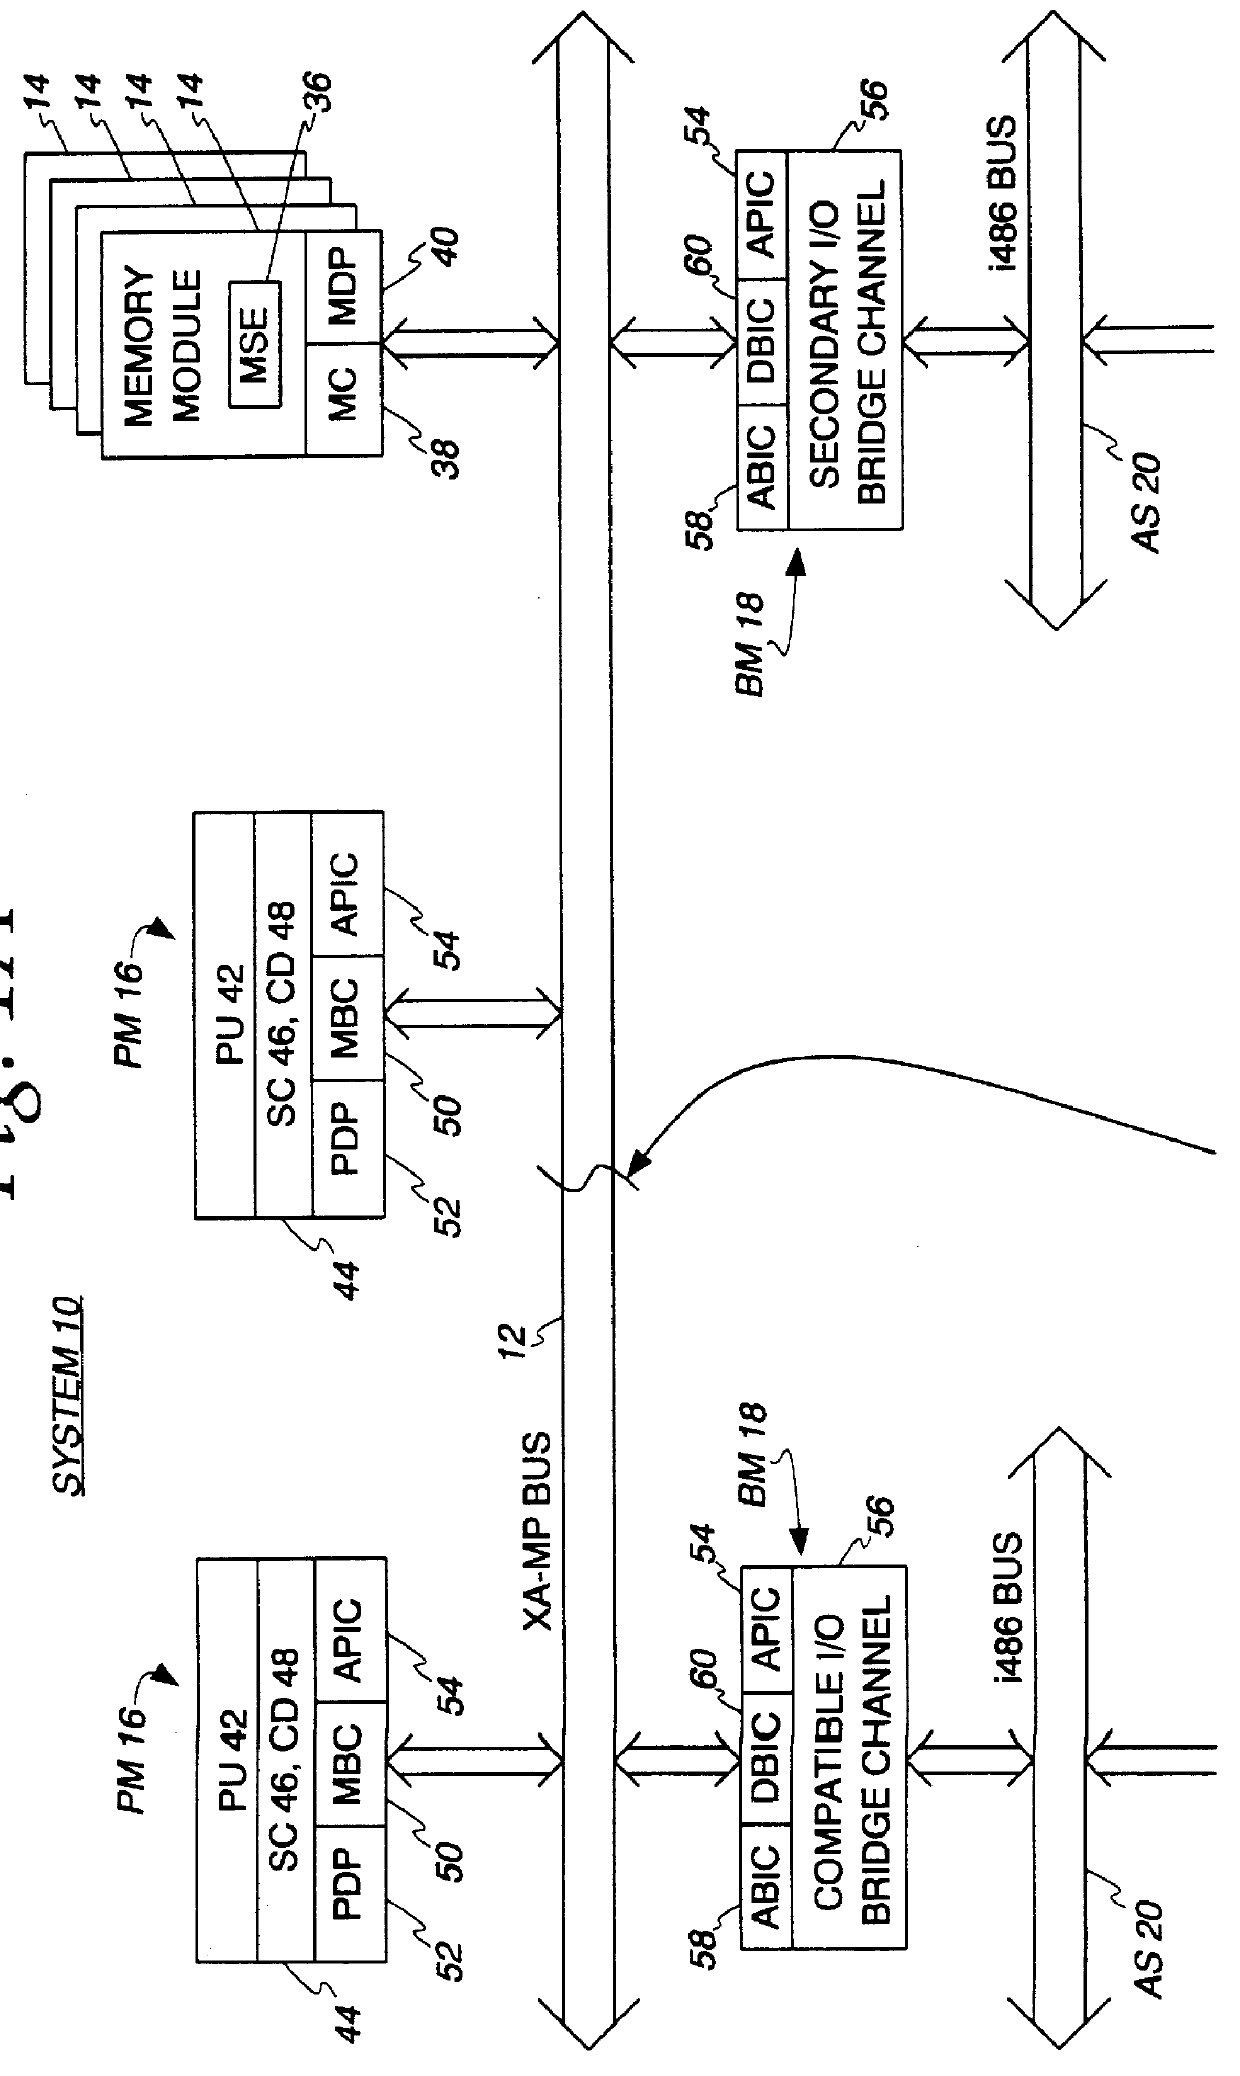 Symmetric multiprocessing system with unified environment and distributed system functions wherein bus operations related storage spaces are mapped into a single system address space